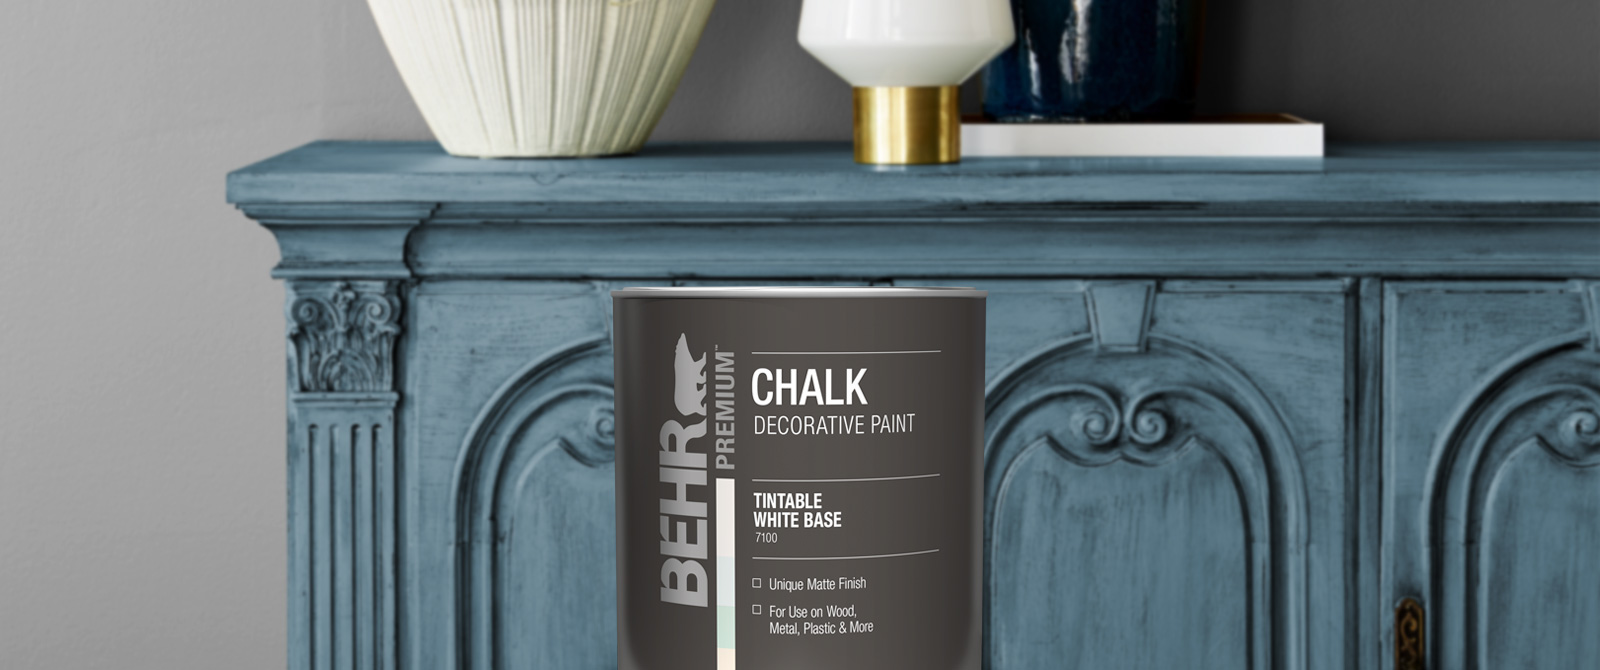 Behr Interior Decorative finishes products landing page desktop image.